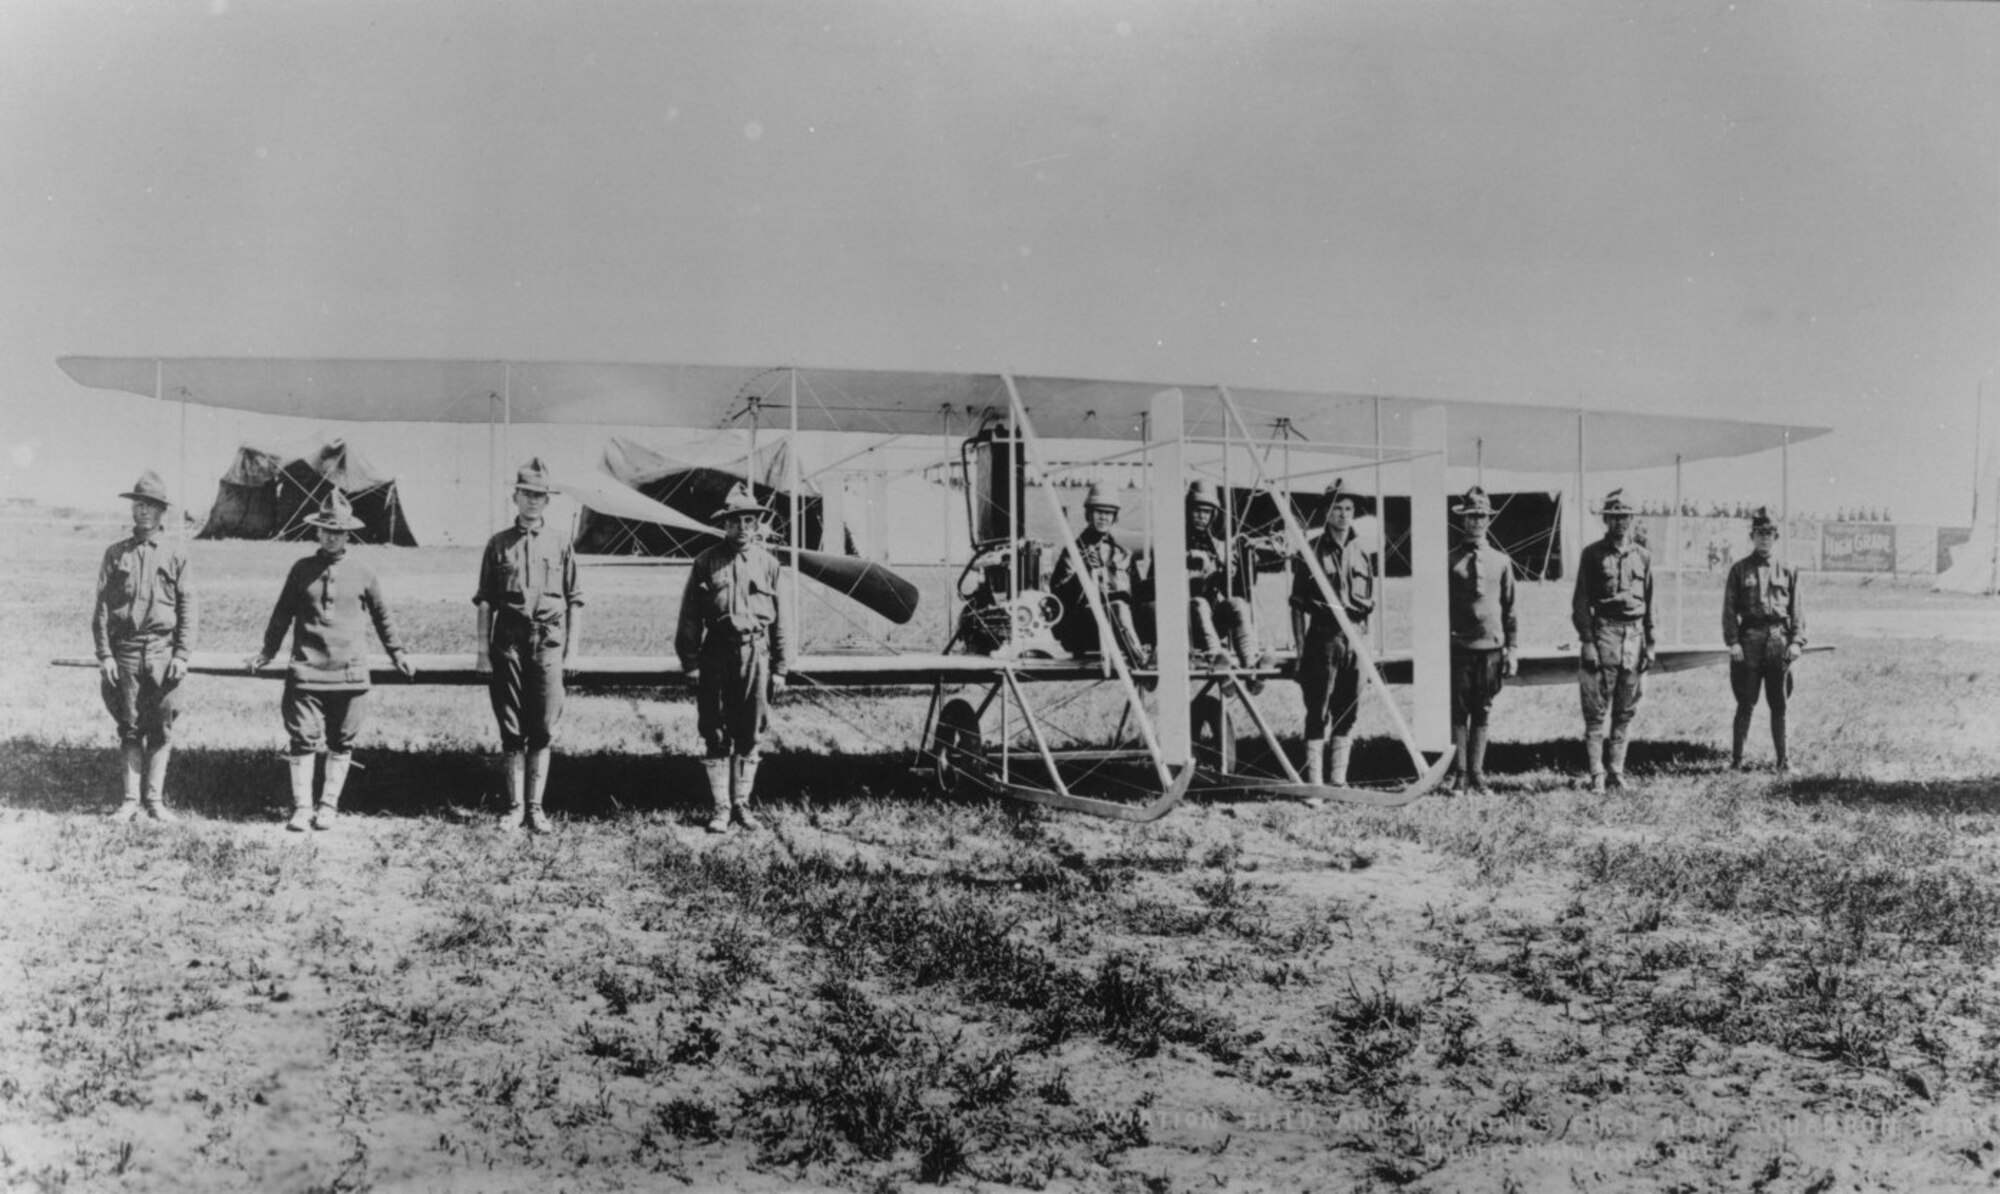 This week in history - March 5, 1913: 1st Aero Squadron (Provisional) activated

In February 1913, President William Howard Taft ordered the U.S. Army 2nd Division, with encampments in Texas City and Galveston, Texas, to mobilize as a defense against increasing tensions with Mexico. On Feb. 25, 1913, the Army’s chief signal officer, Brig. Gen. George P. Scriven, ordered the airplanes, soldiers and equipment then at the aviation training school at Augusta, Georgia, to Texas City. On March 5, the Army designated the small command the 1st Aero Squadron (Provisional). The unit consisted of nine airplanes, nine officers and 51 enlisted men. One of the officers was 1st. Lt. Roy C. Kirtland, (whose name would be given to the former Albuquerque Army Air Base in 1942), who commanded the 1st Aero Squadron from June to November 1913. Kirtland is fifth from the right, at the controls of the Wright C aircraft. In December, the 1st Aero Squadron dropped “Provisional” from its title to become the Army’s first regular air squadron.
